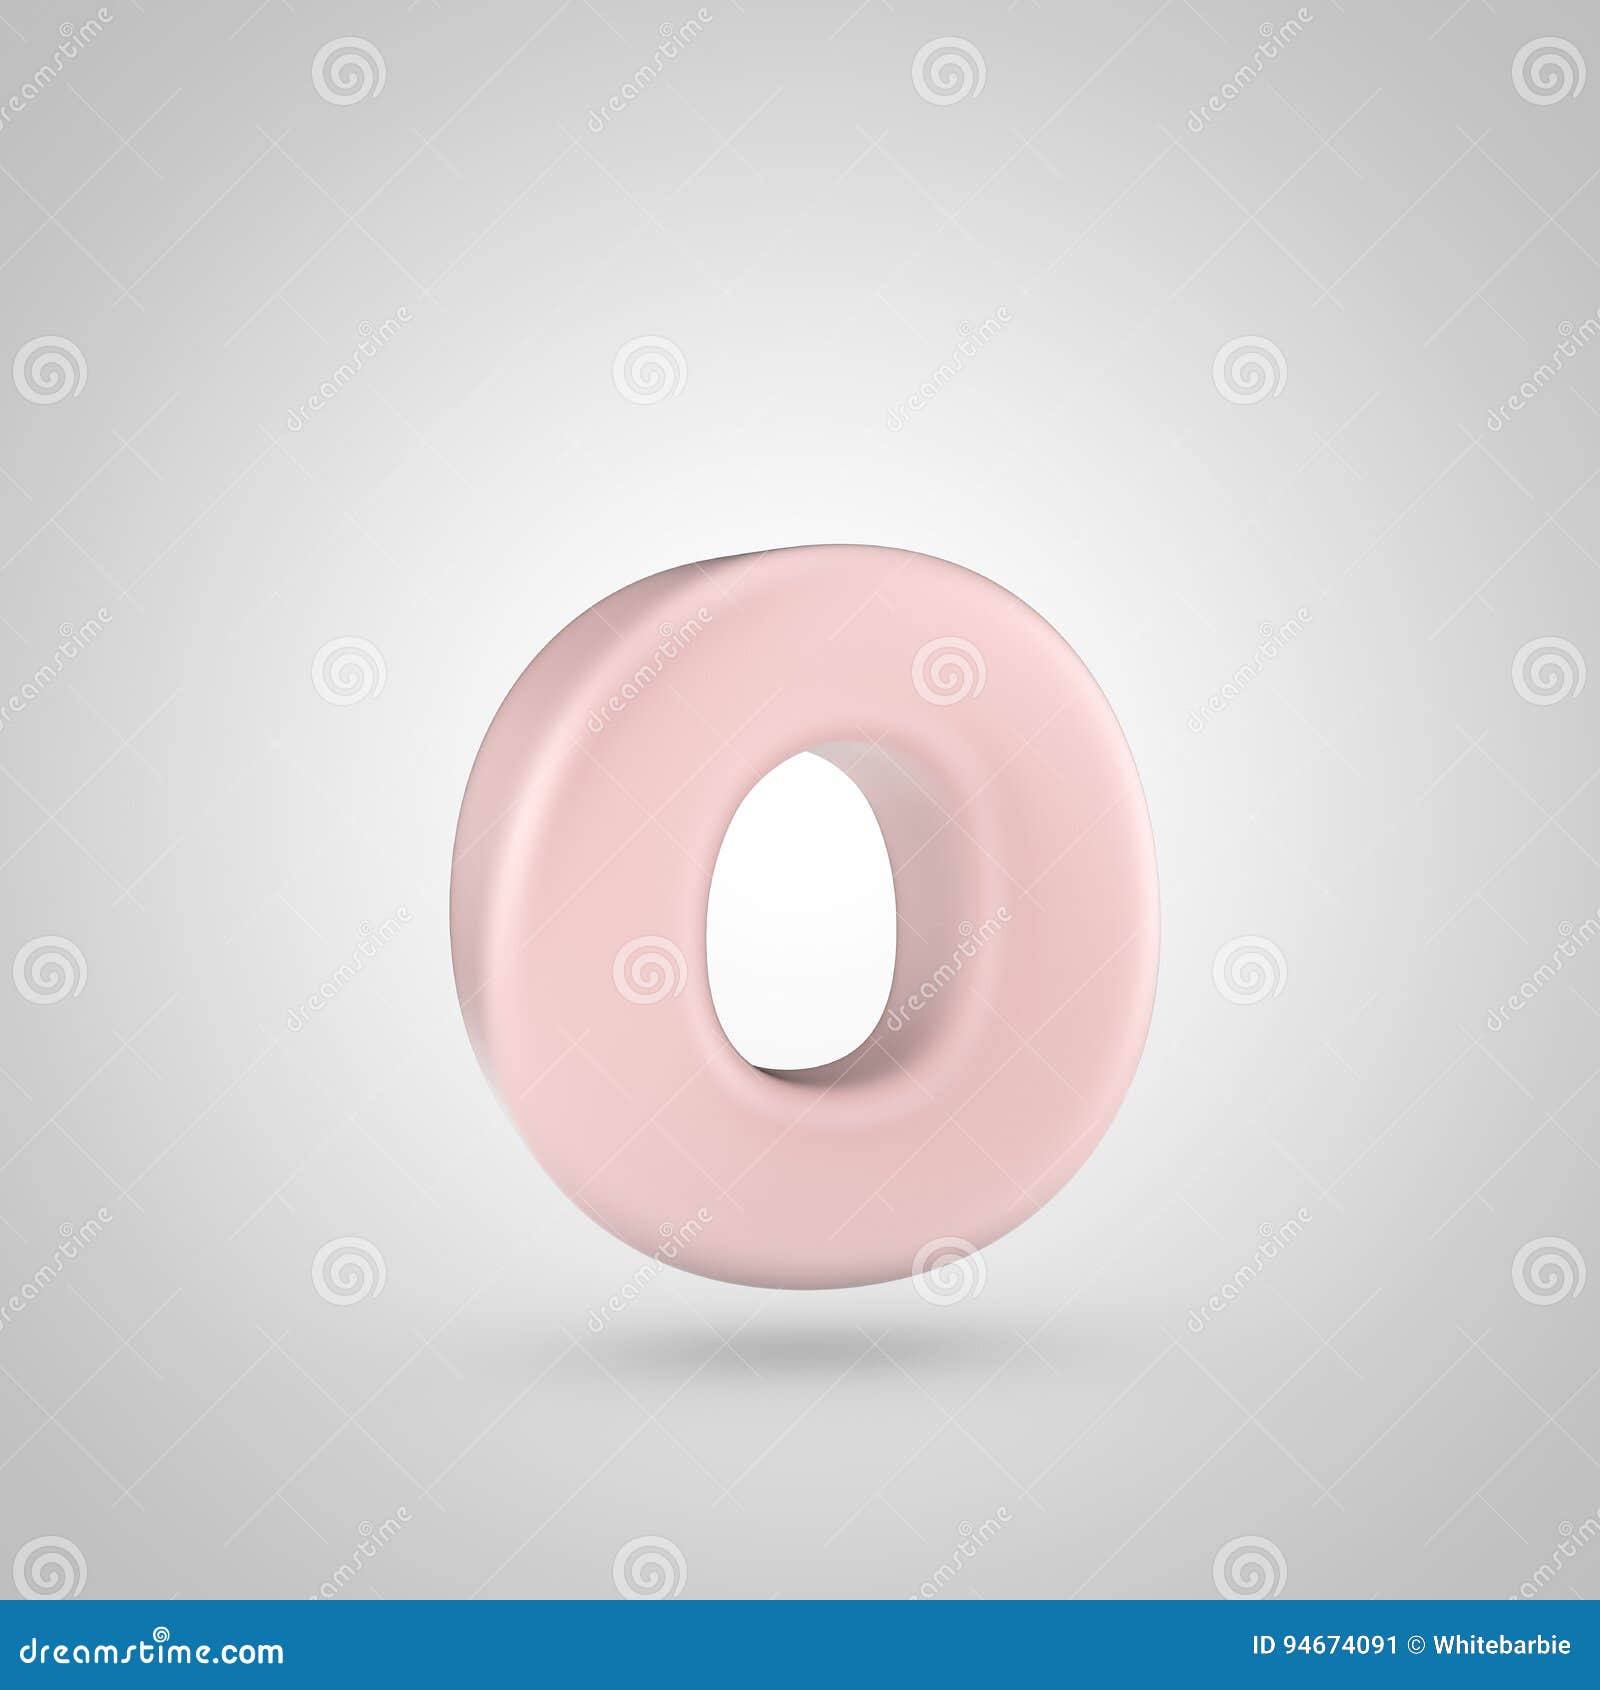 Millennium Pink Color Letter O Lowercase On White Background Stock